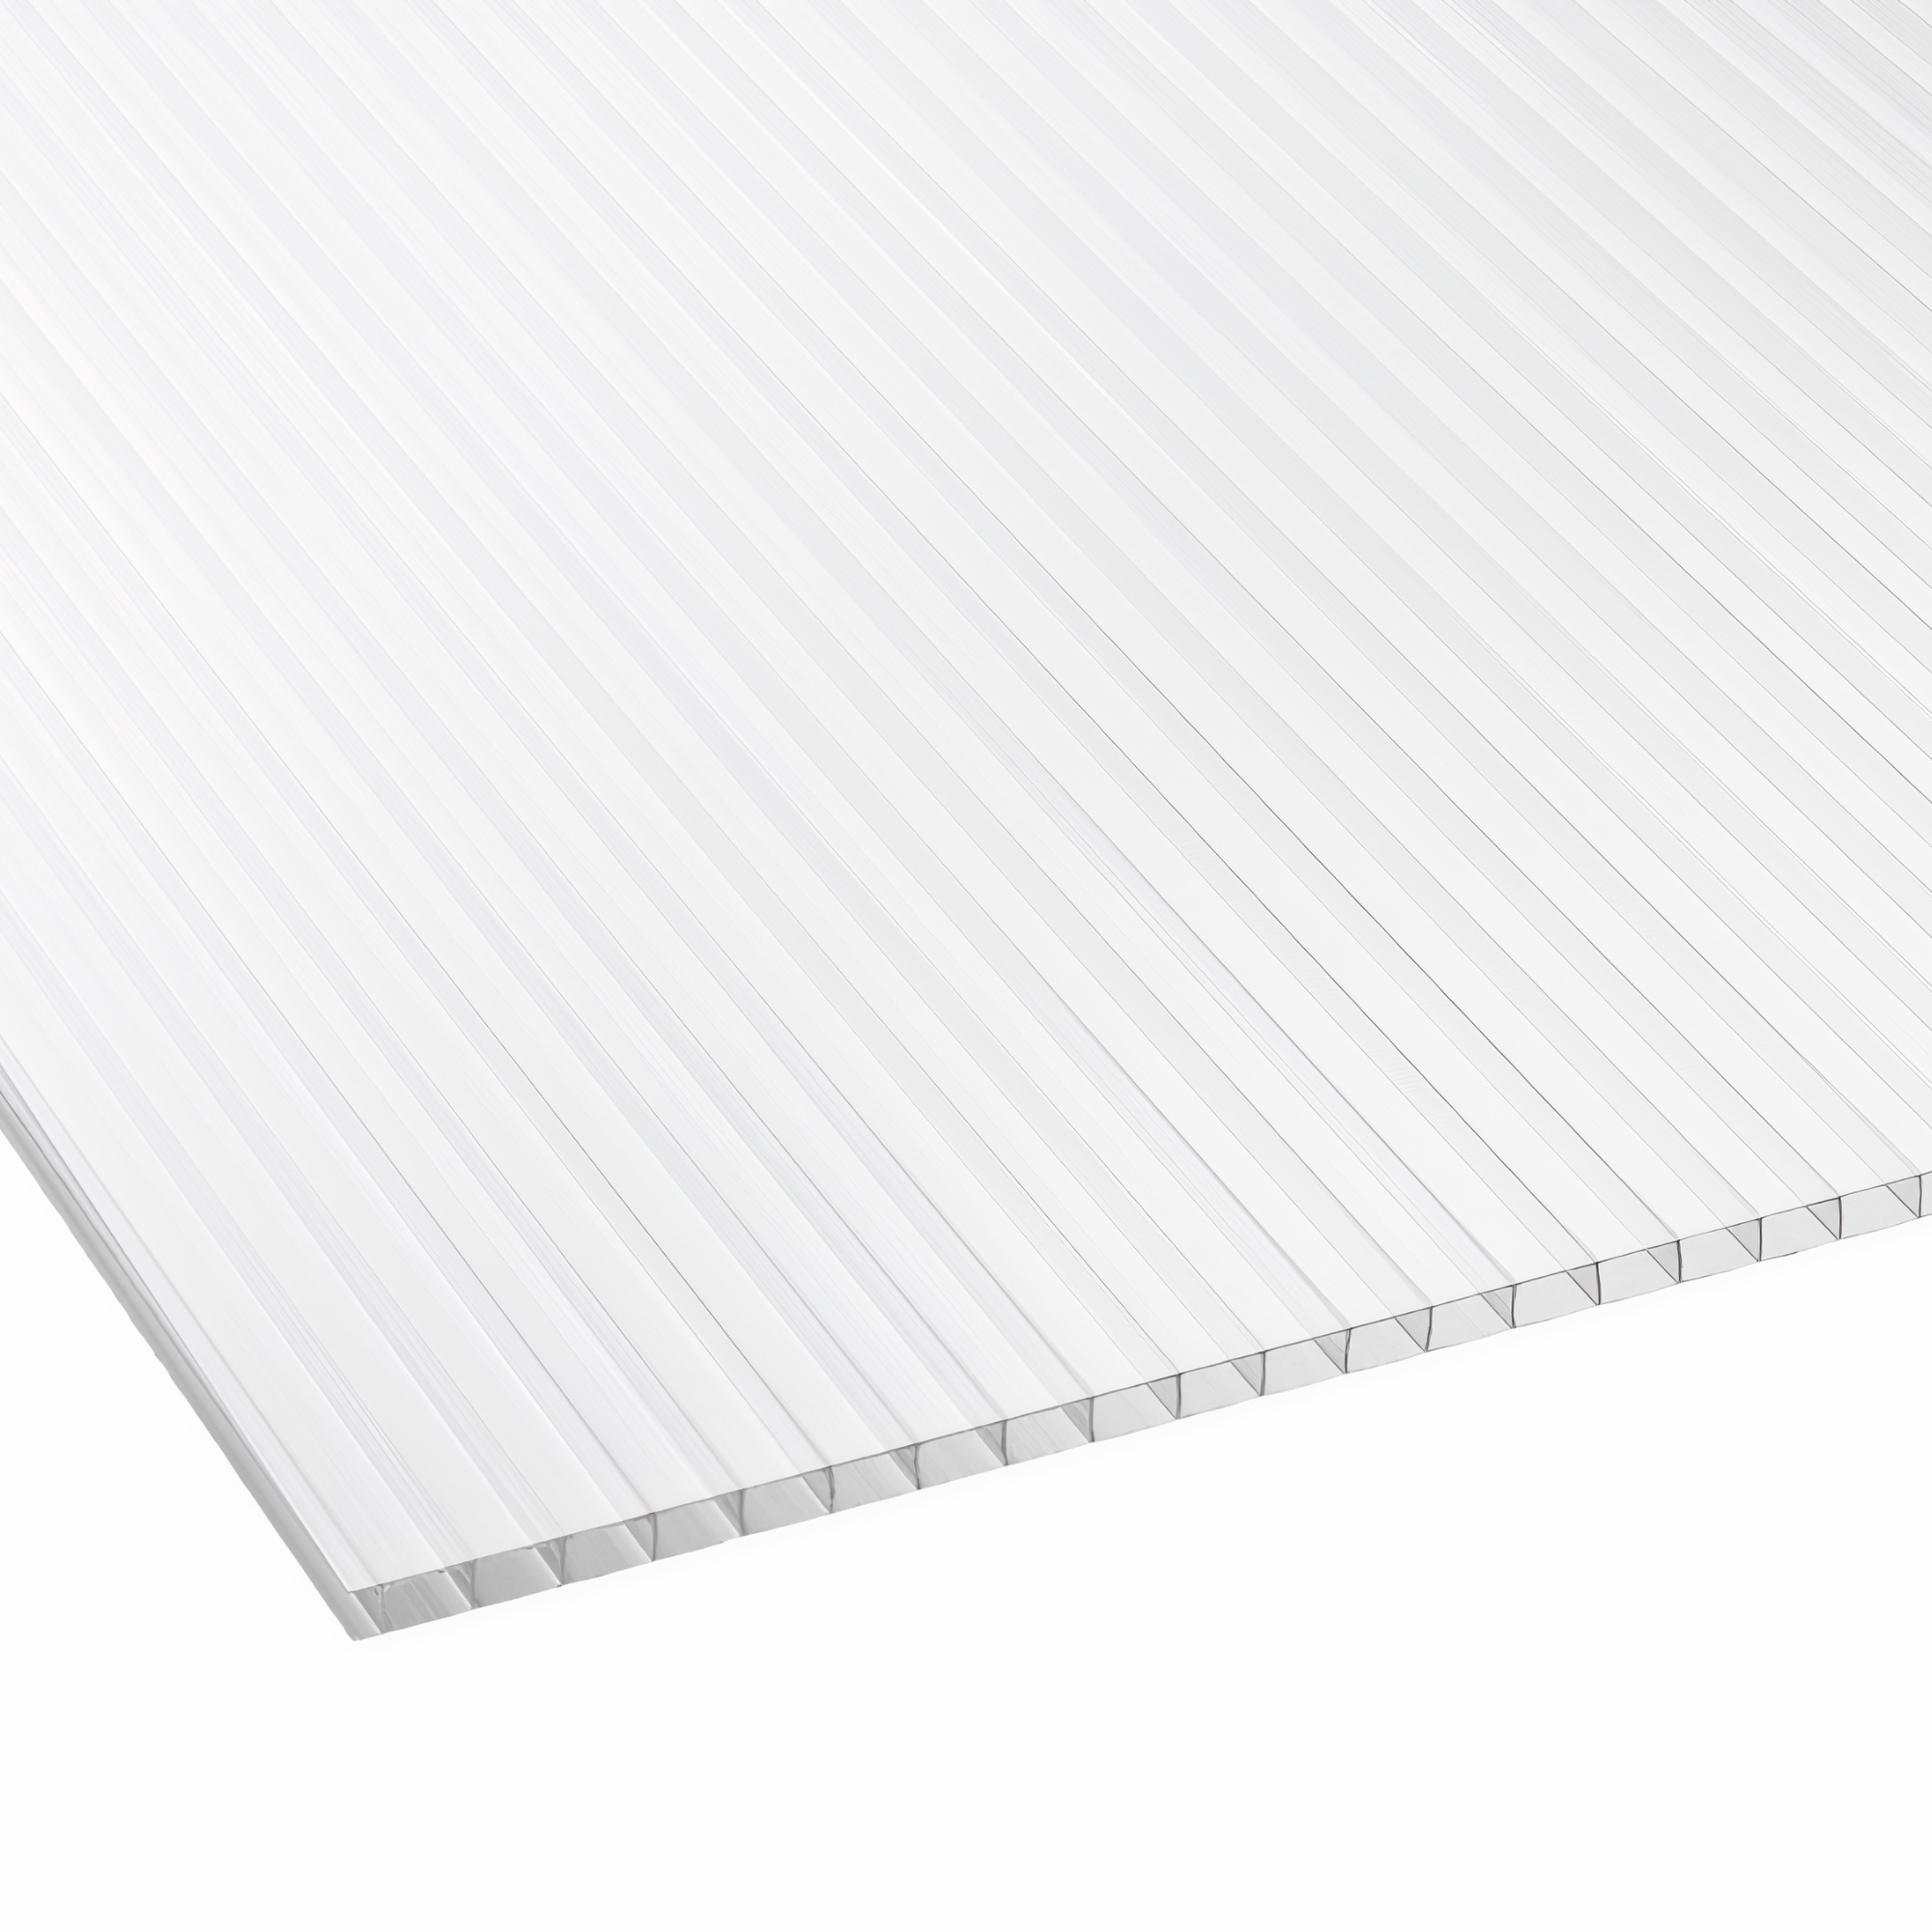 4mm Polycarbonate Sheets - 402mm x 1000mm